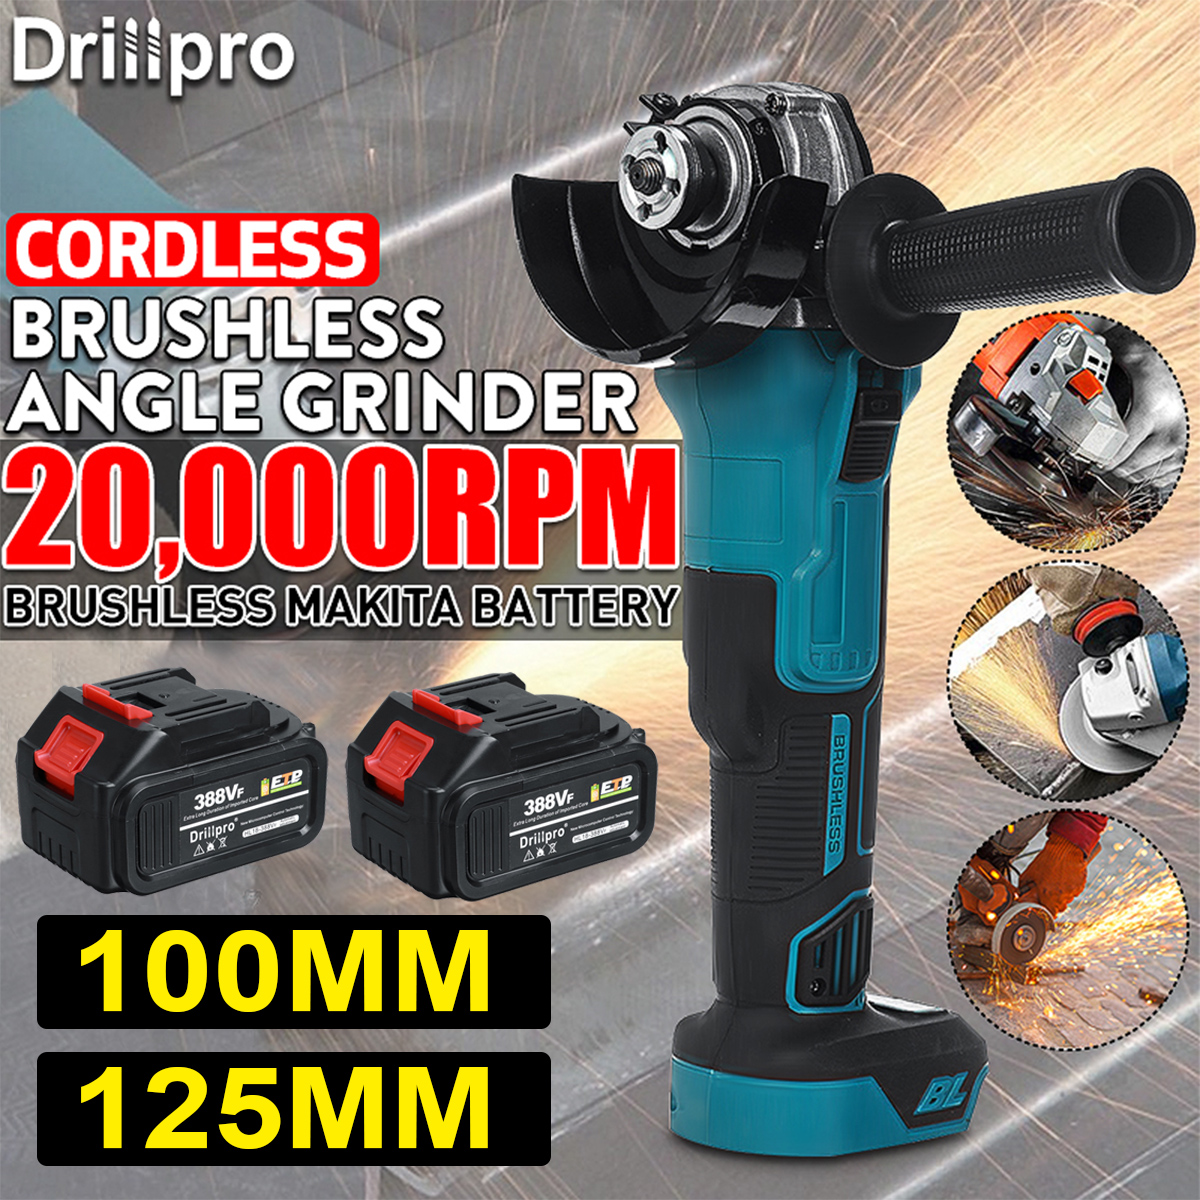 Drillpro-388VF-100mm125mm-Brushless-Angle-Grinder-Rechargeable-Electric-Cutting-Grinding-Tool-W-12-B-1861855-2